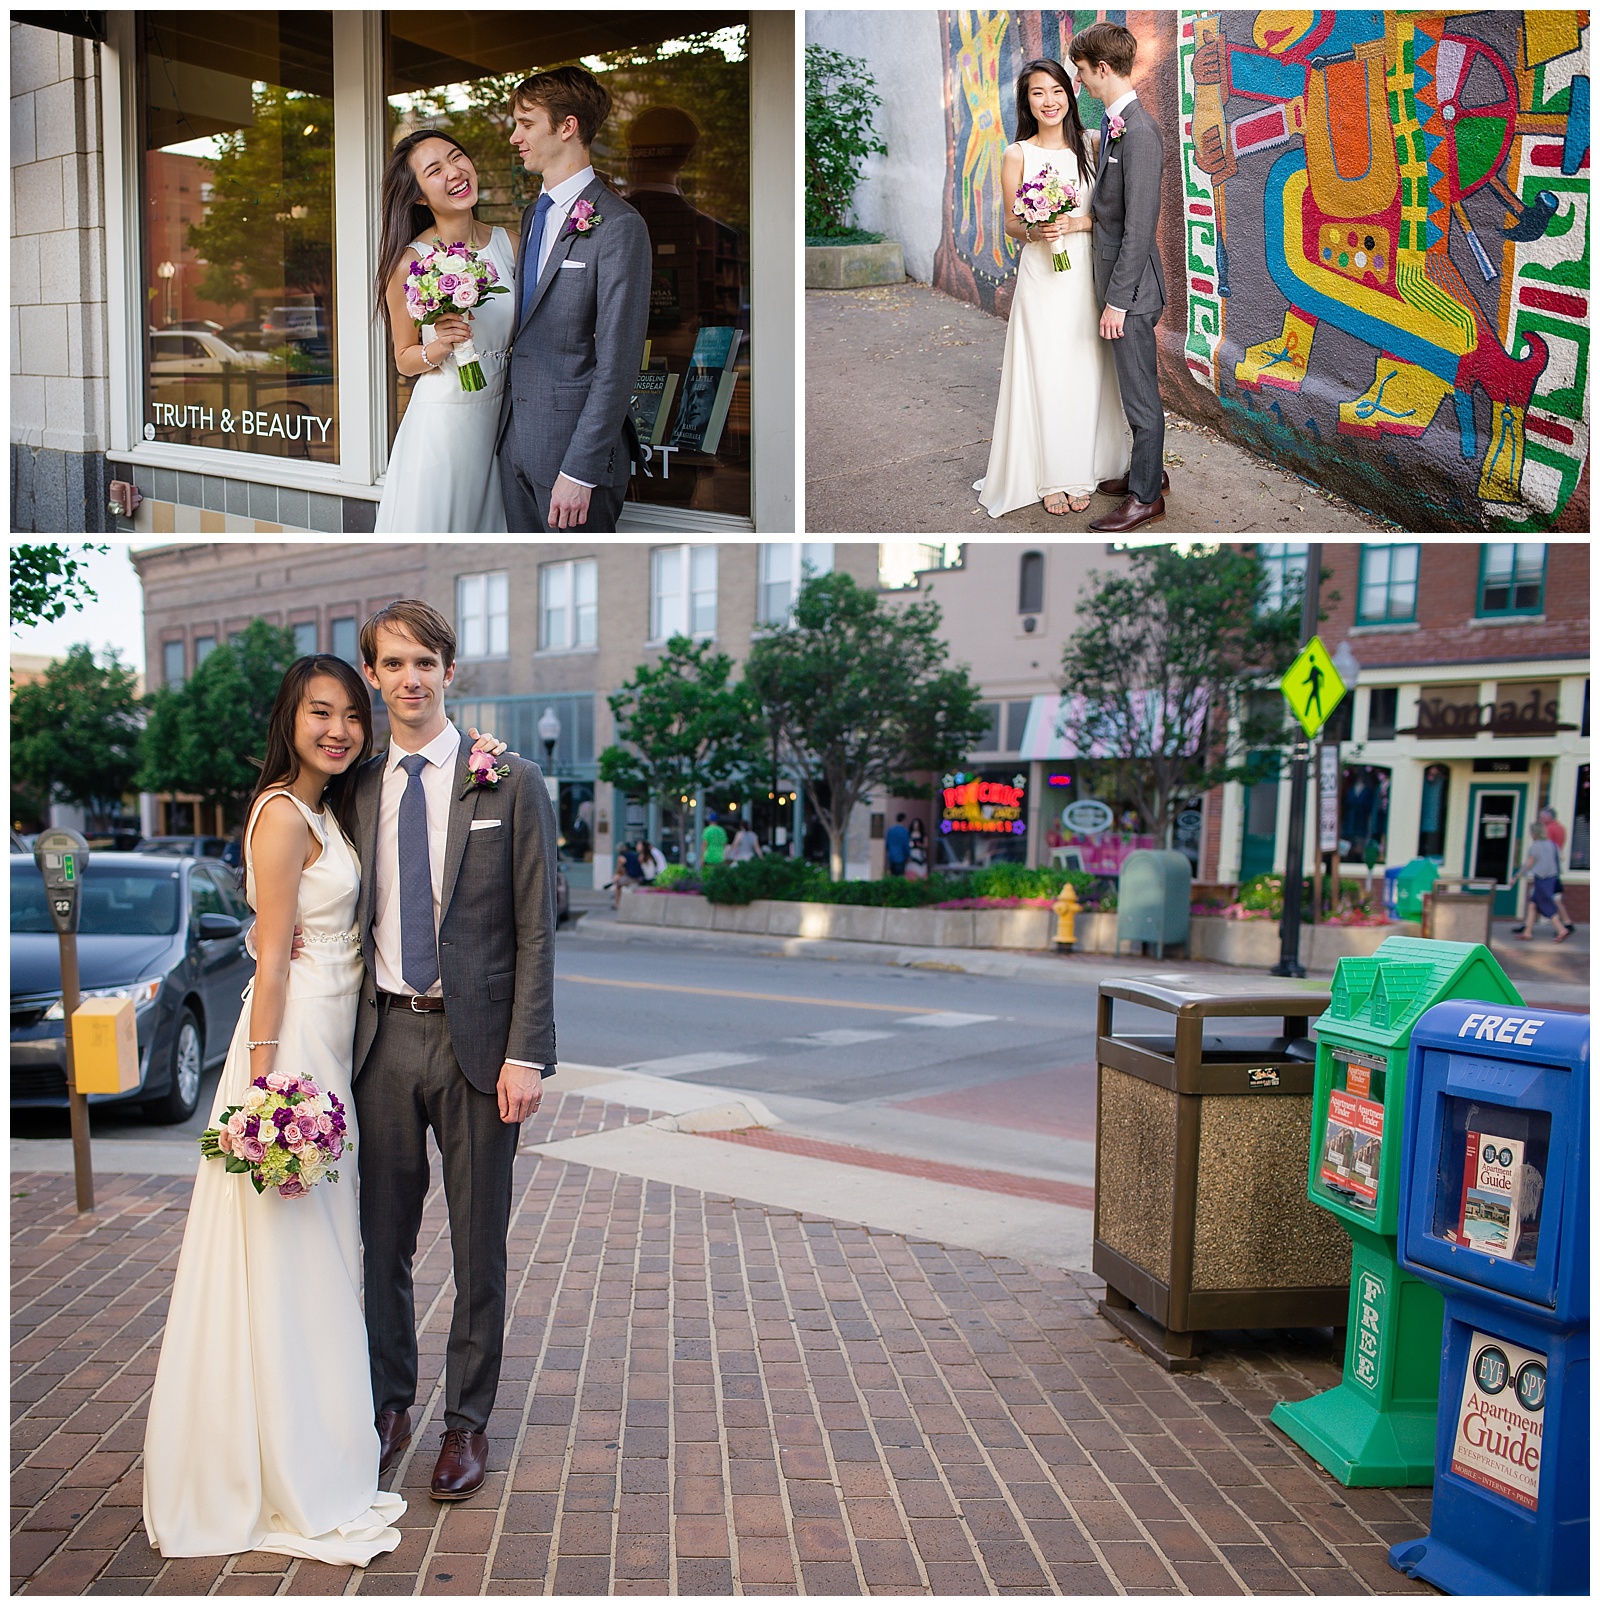 Wedding photography at Signs of Life in Lawrence, Kansas.